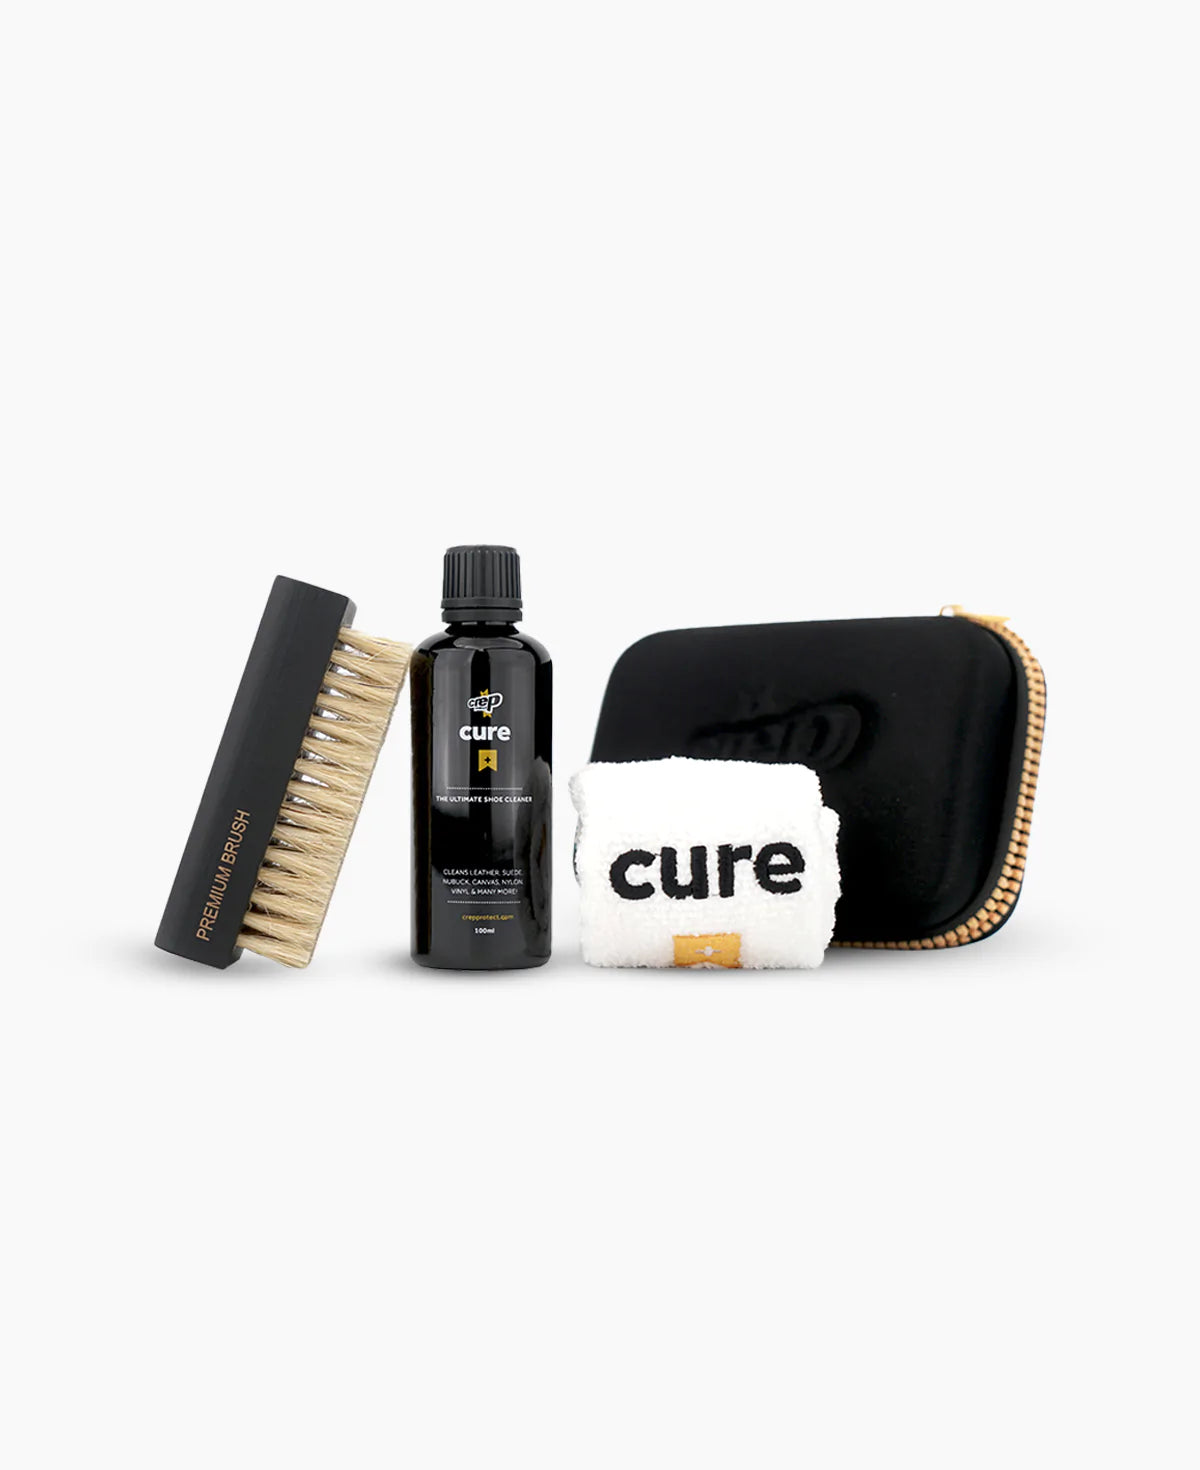 CURE CLEANING KIT